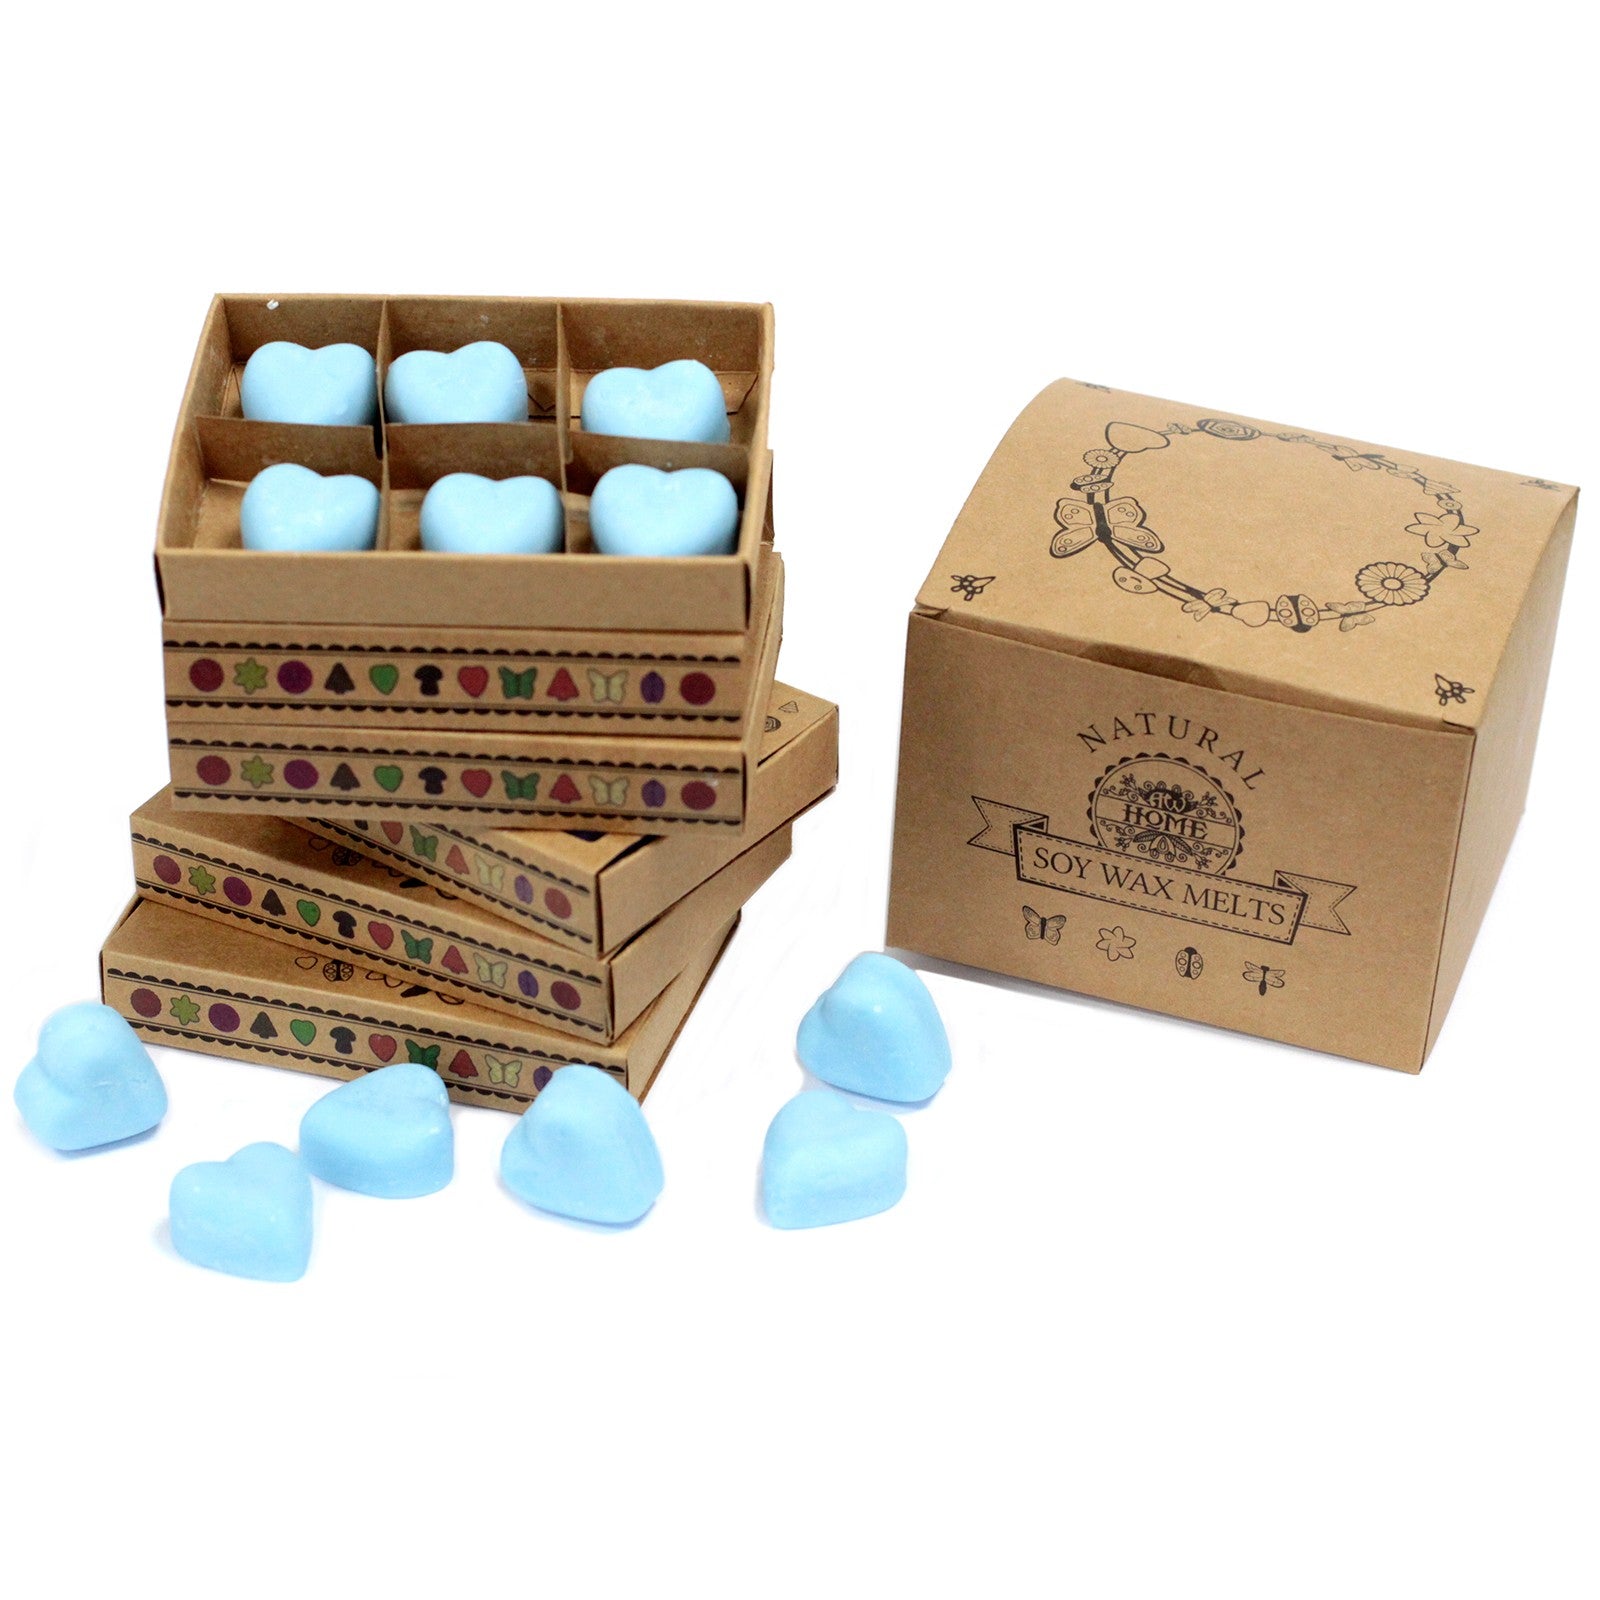 View Box of 6 Wax Melts Dewberry information